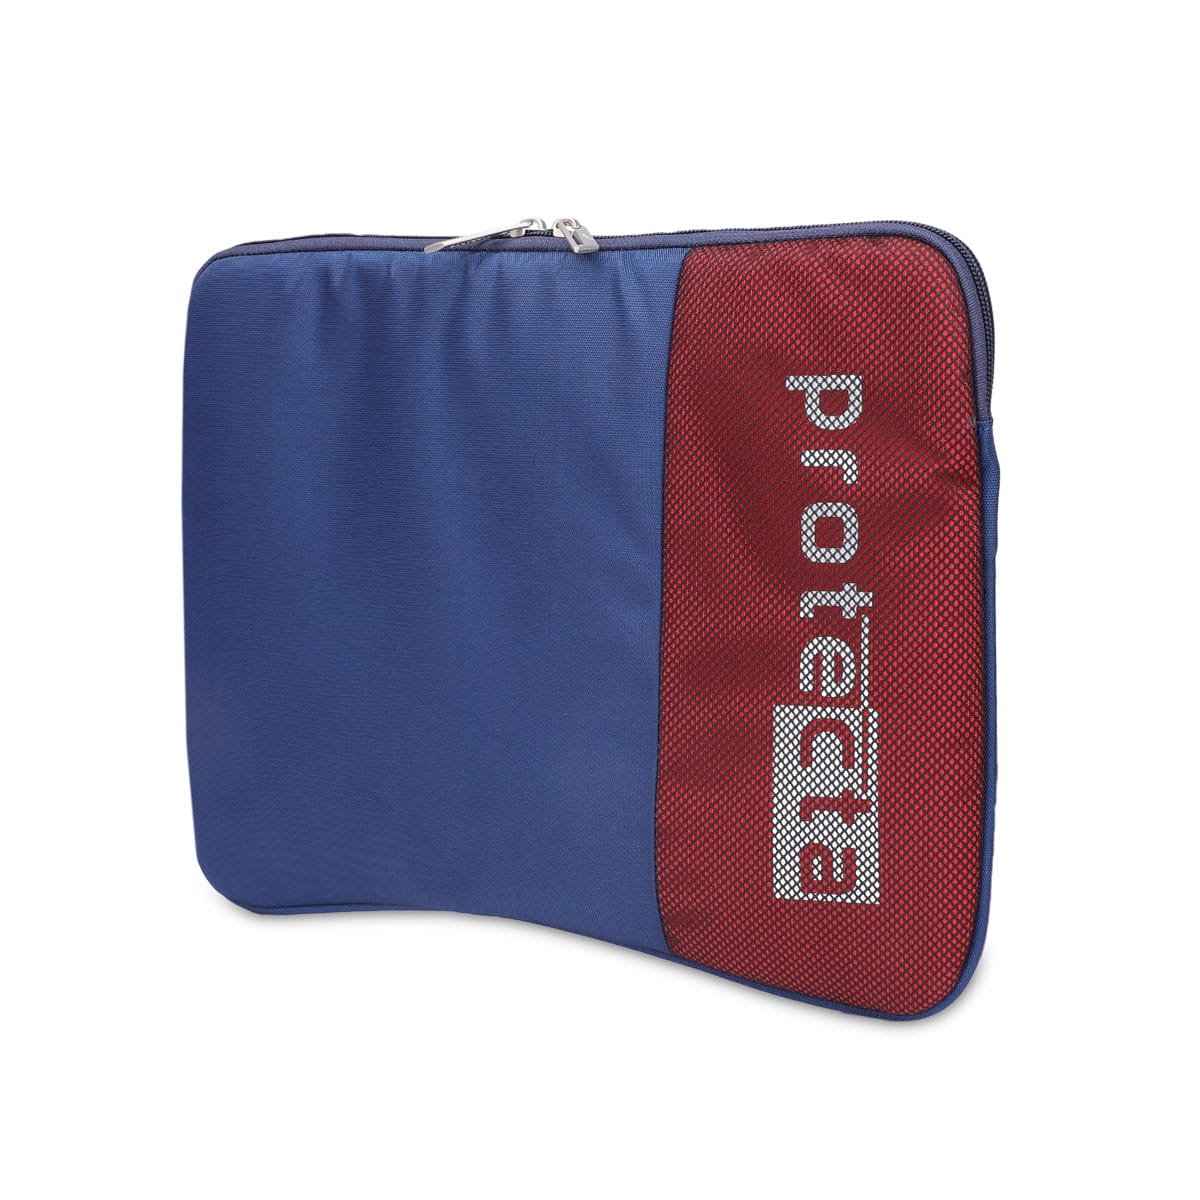 Navy-Red, Enigma Laptop Sleeve-1